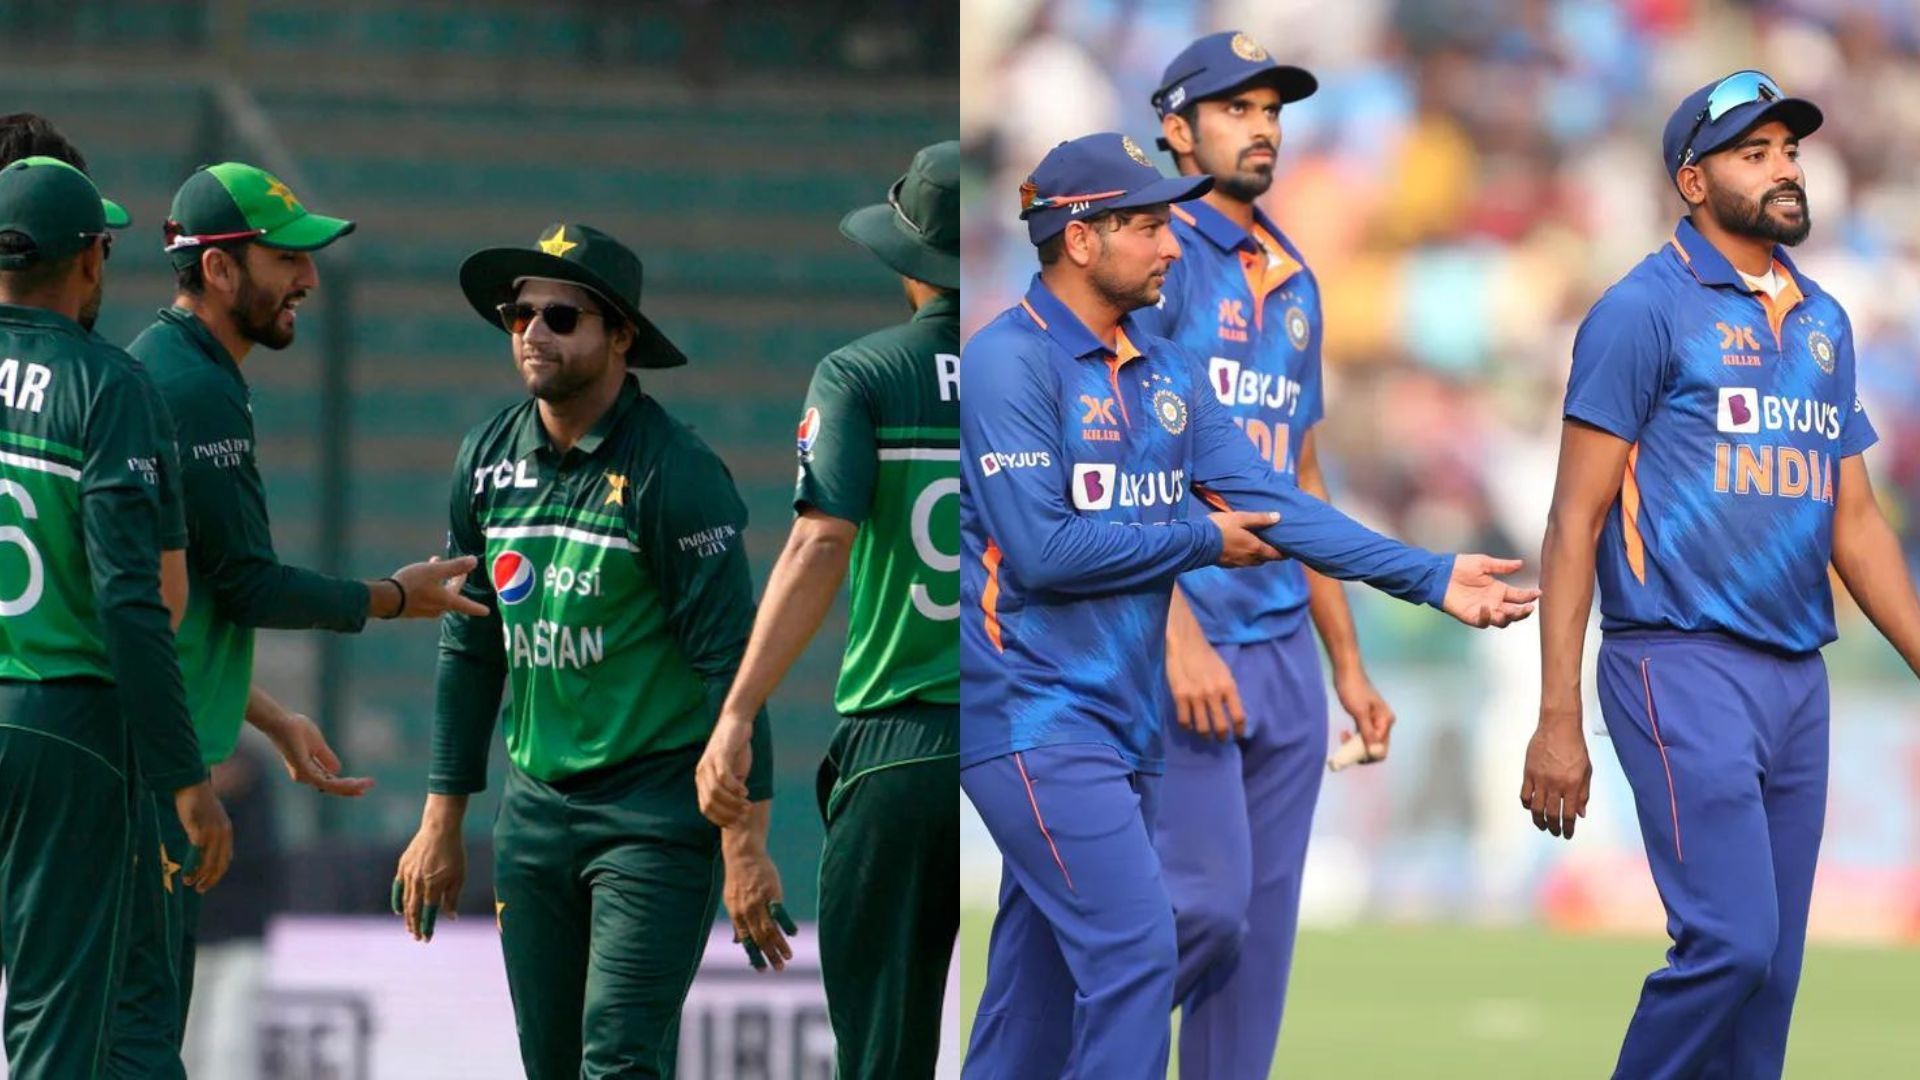 Pakistan &amp; India have had contrasting performances at home against New Zealand this month. (P.C.:Twitter &amp; BCCI)